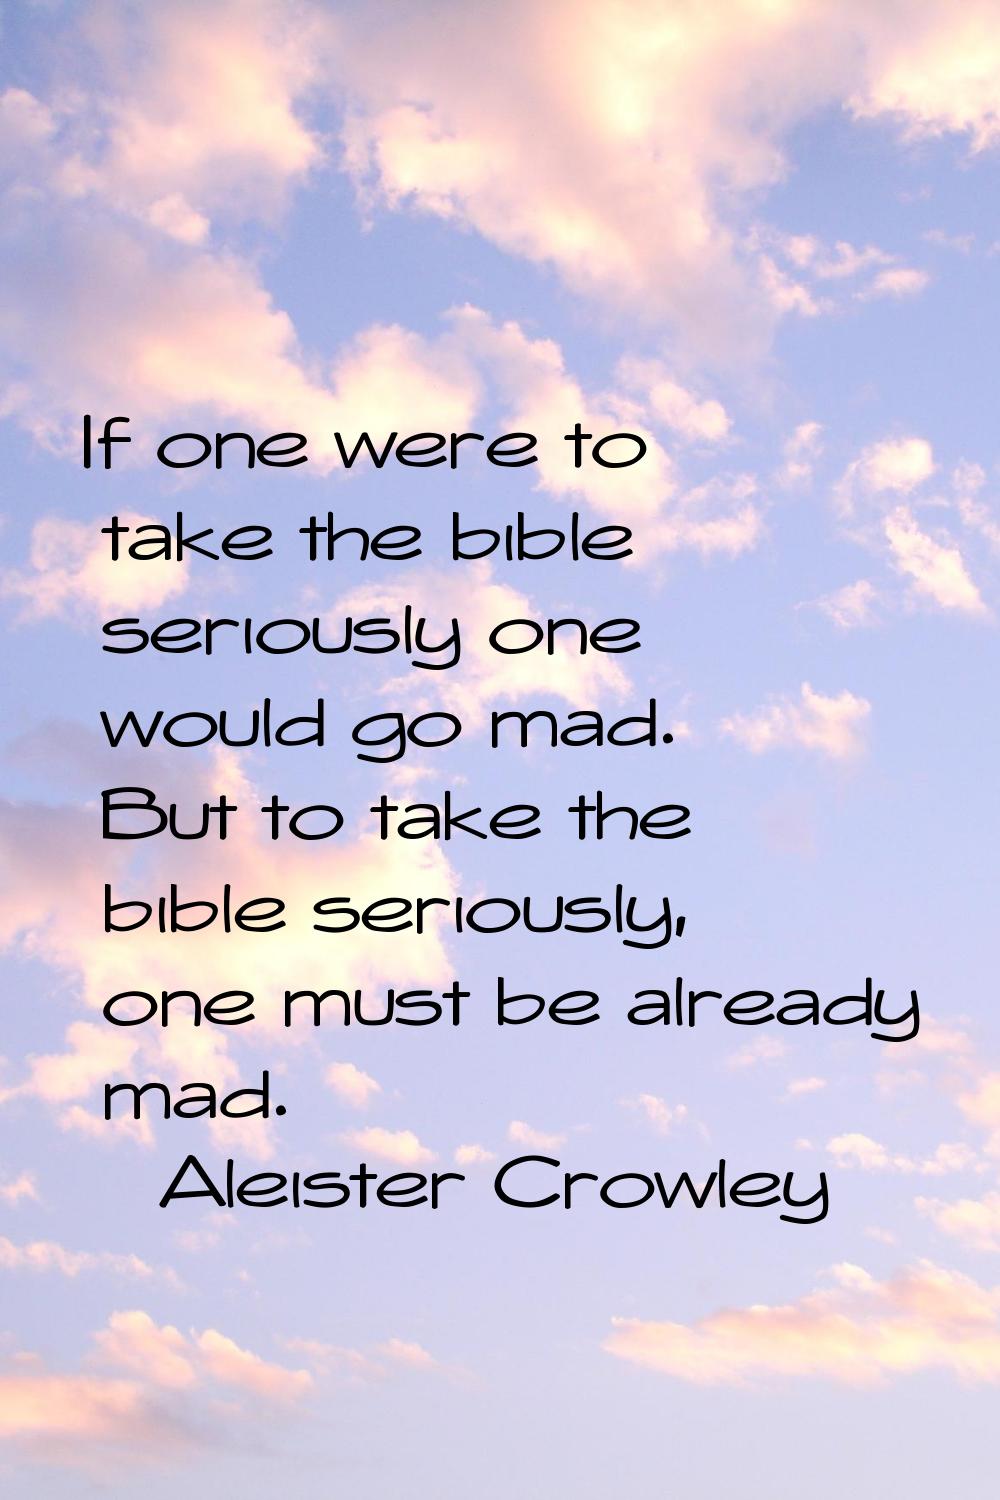 If one were to take the bible seriously one would go mad. But to take the bible seriously, one must